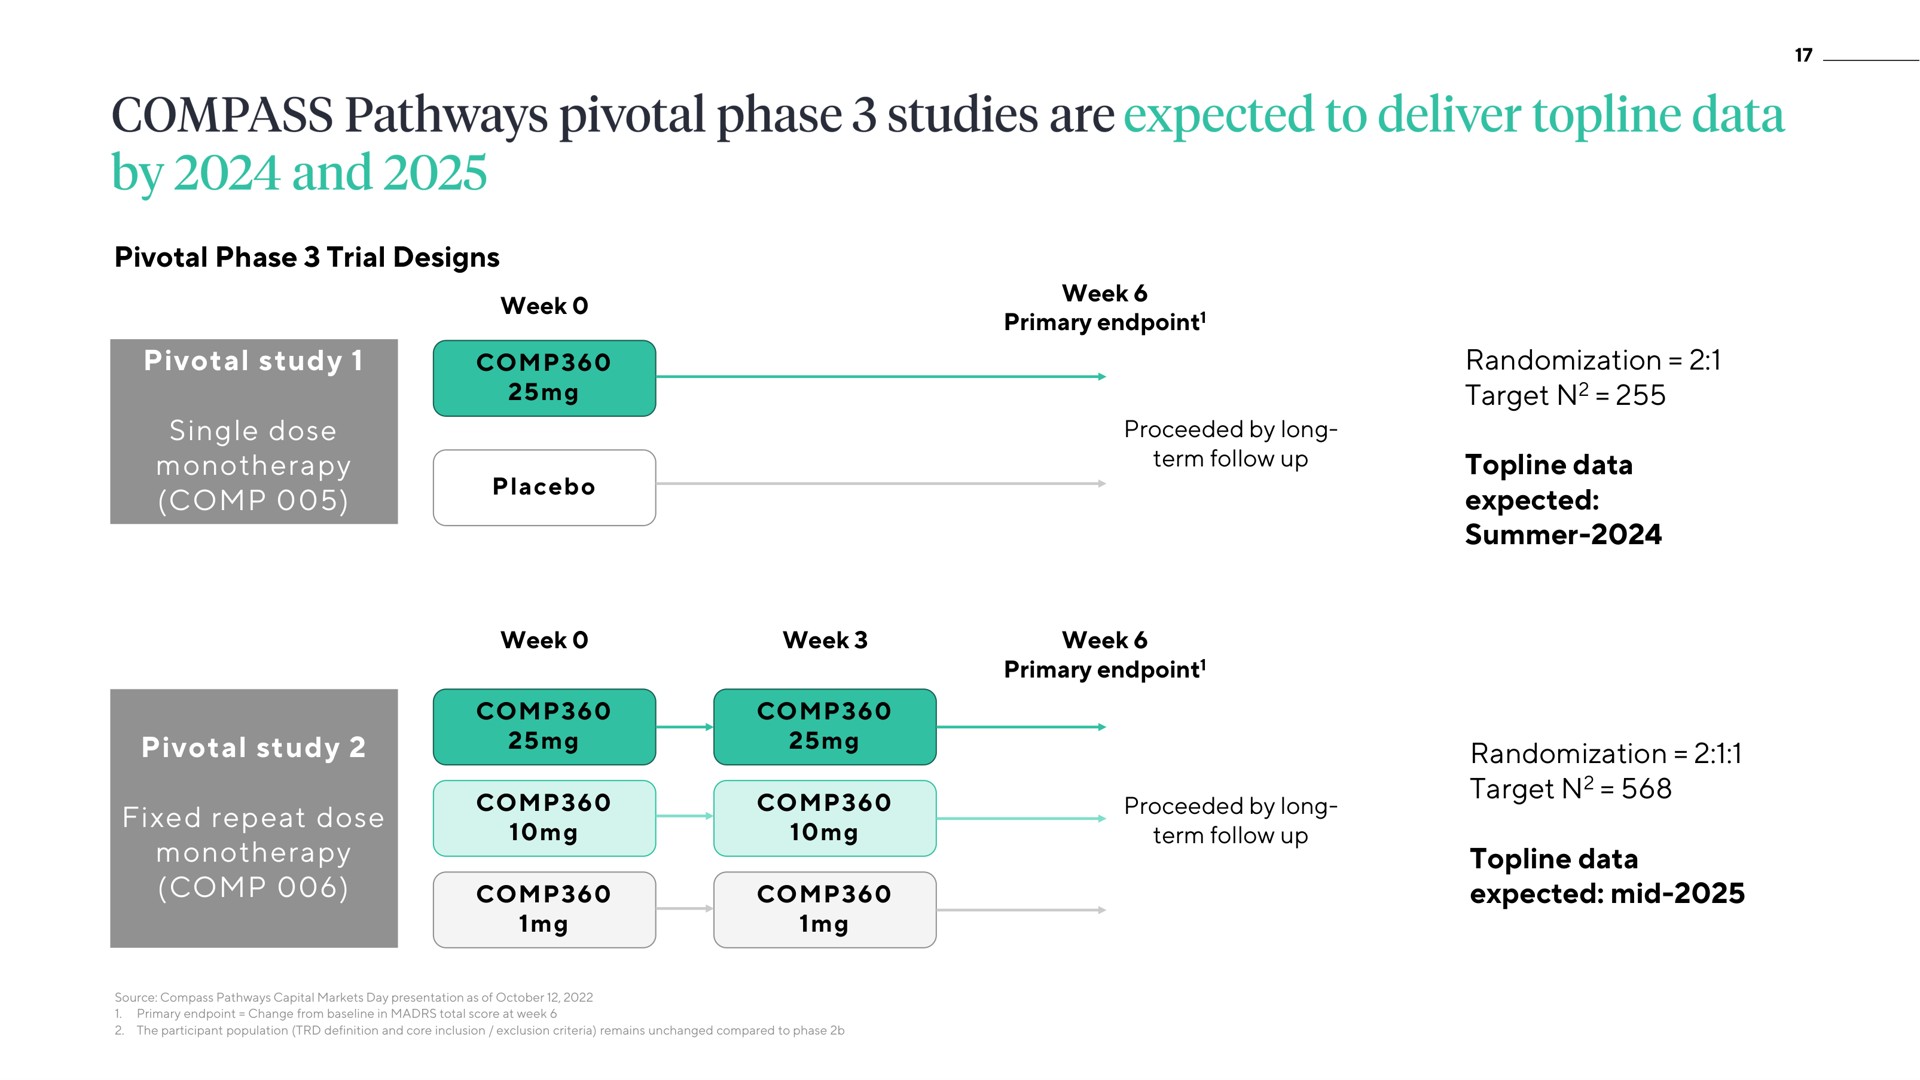 pivotal phase trial designs pivotal study single dose randomization target topline data expected summer pivotal study fixed repeat dose randomization target topline data expected mid compass pathways studies are to deliver by and | ATAI